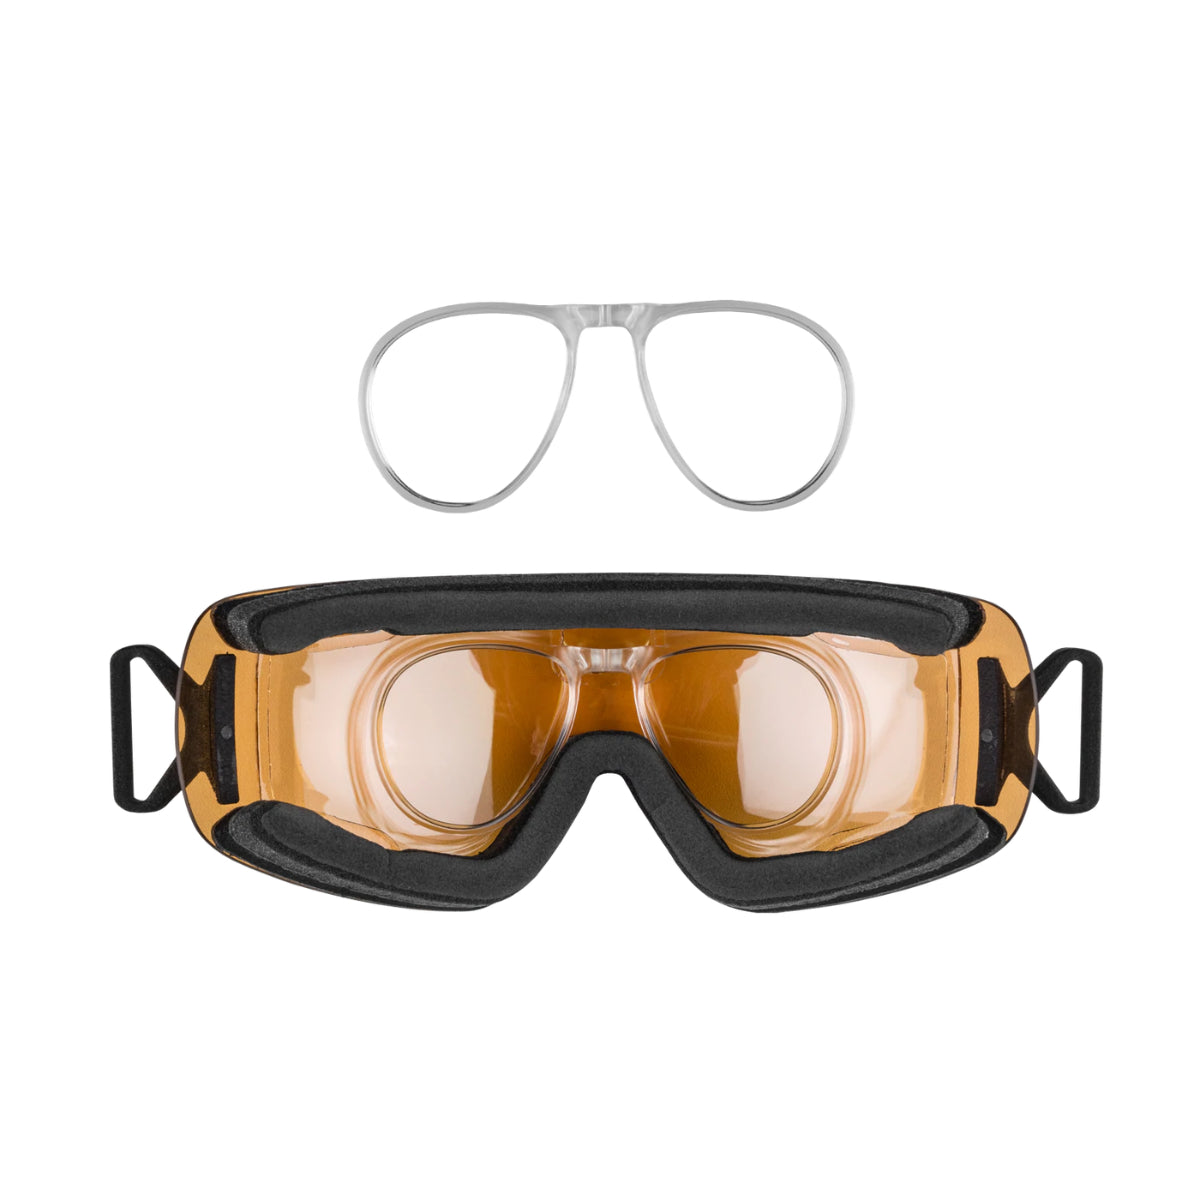 Grivel Ice Goggles